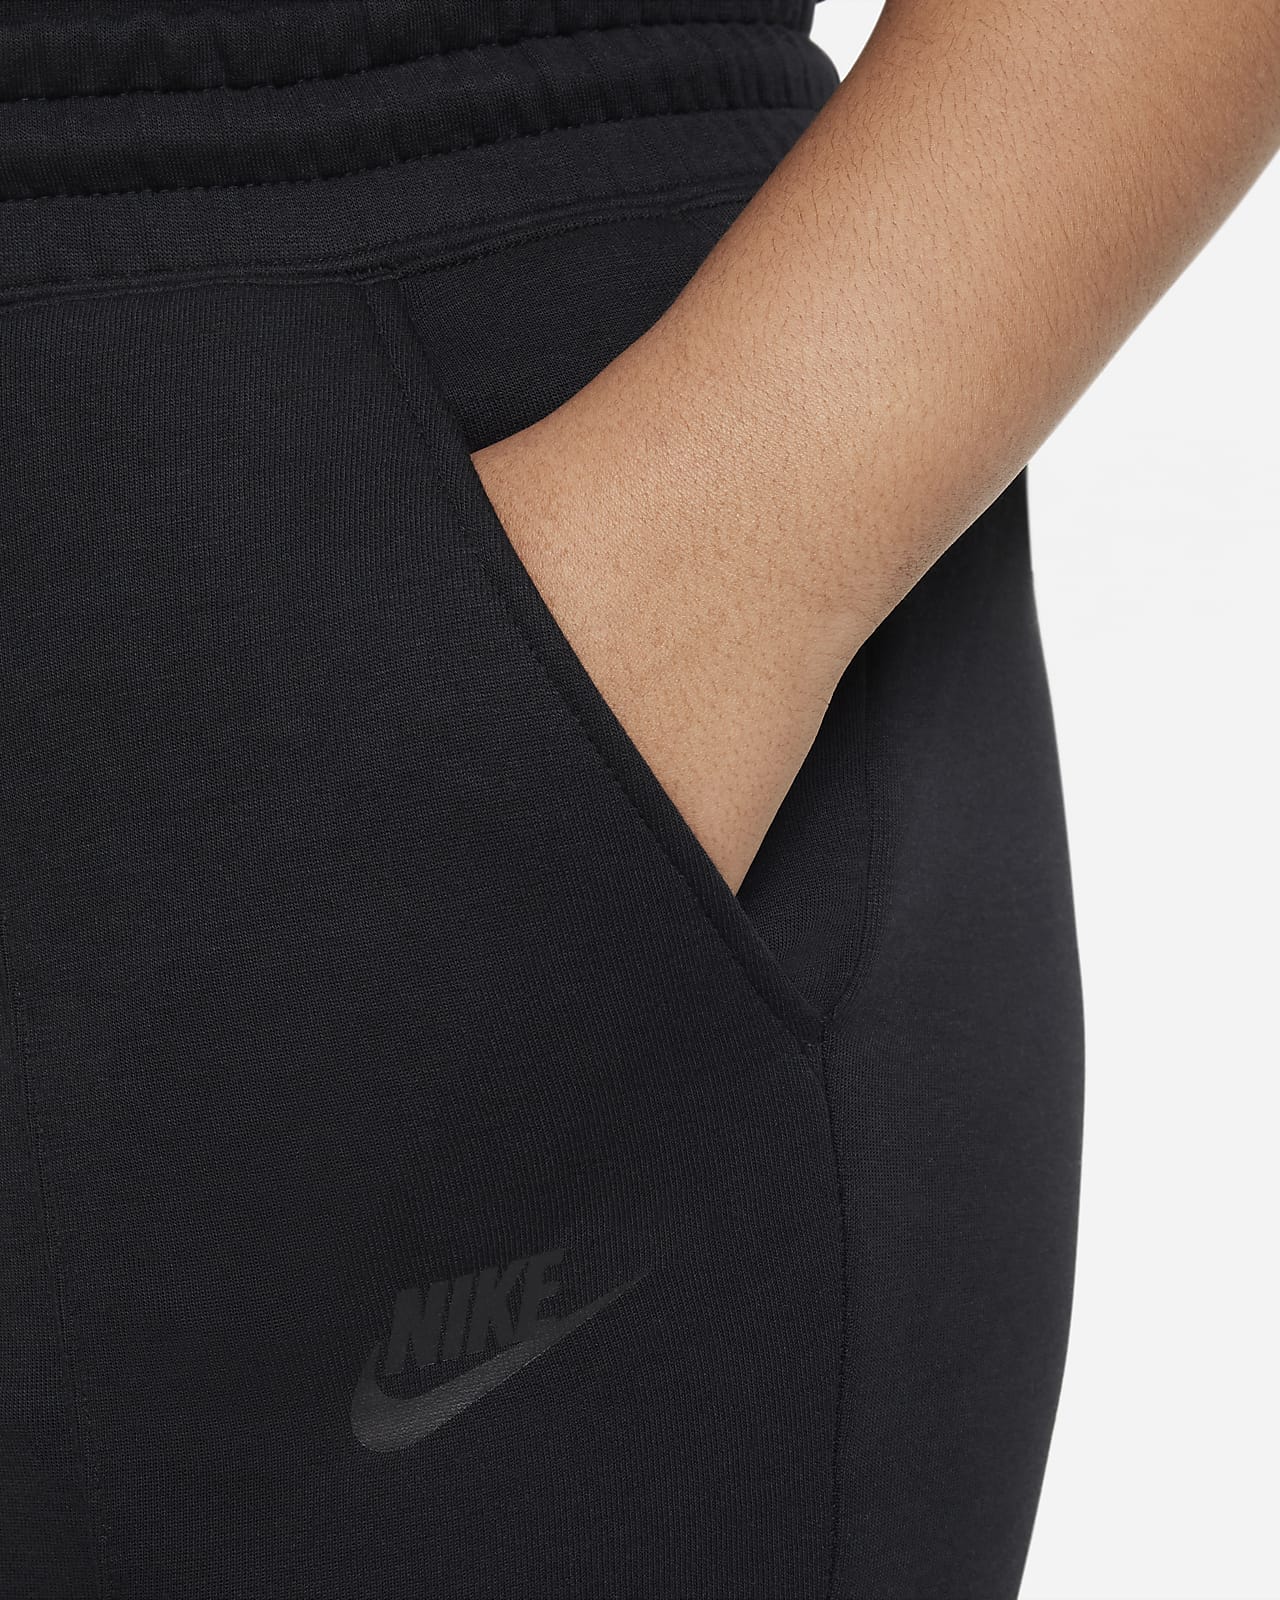 NIKE TECH-FLEECE ANTHRACITE JOGGERS❄️, OLD